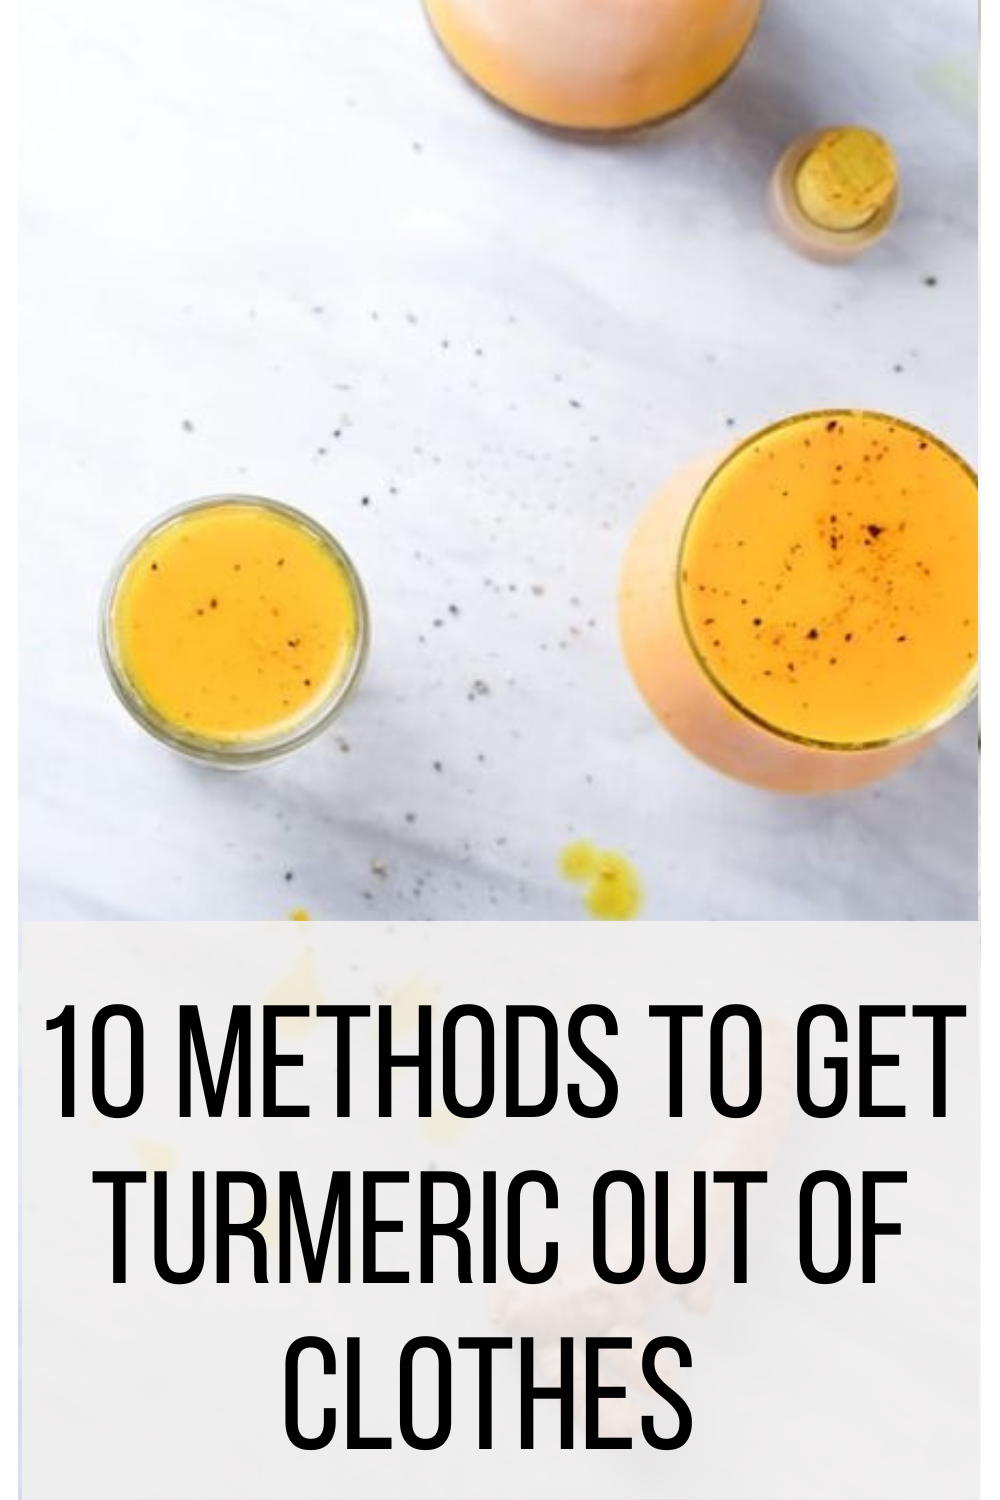 10 Methods to Get Turmeric Out of Clothes